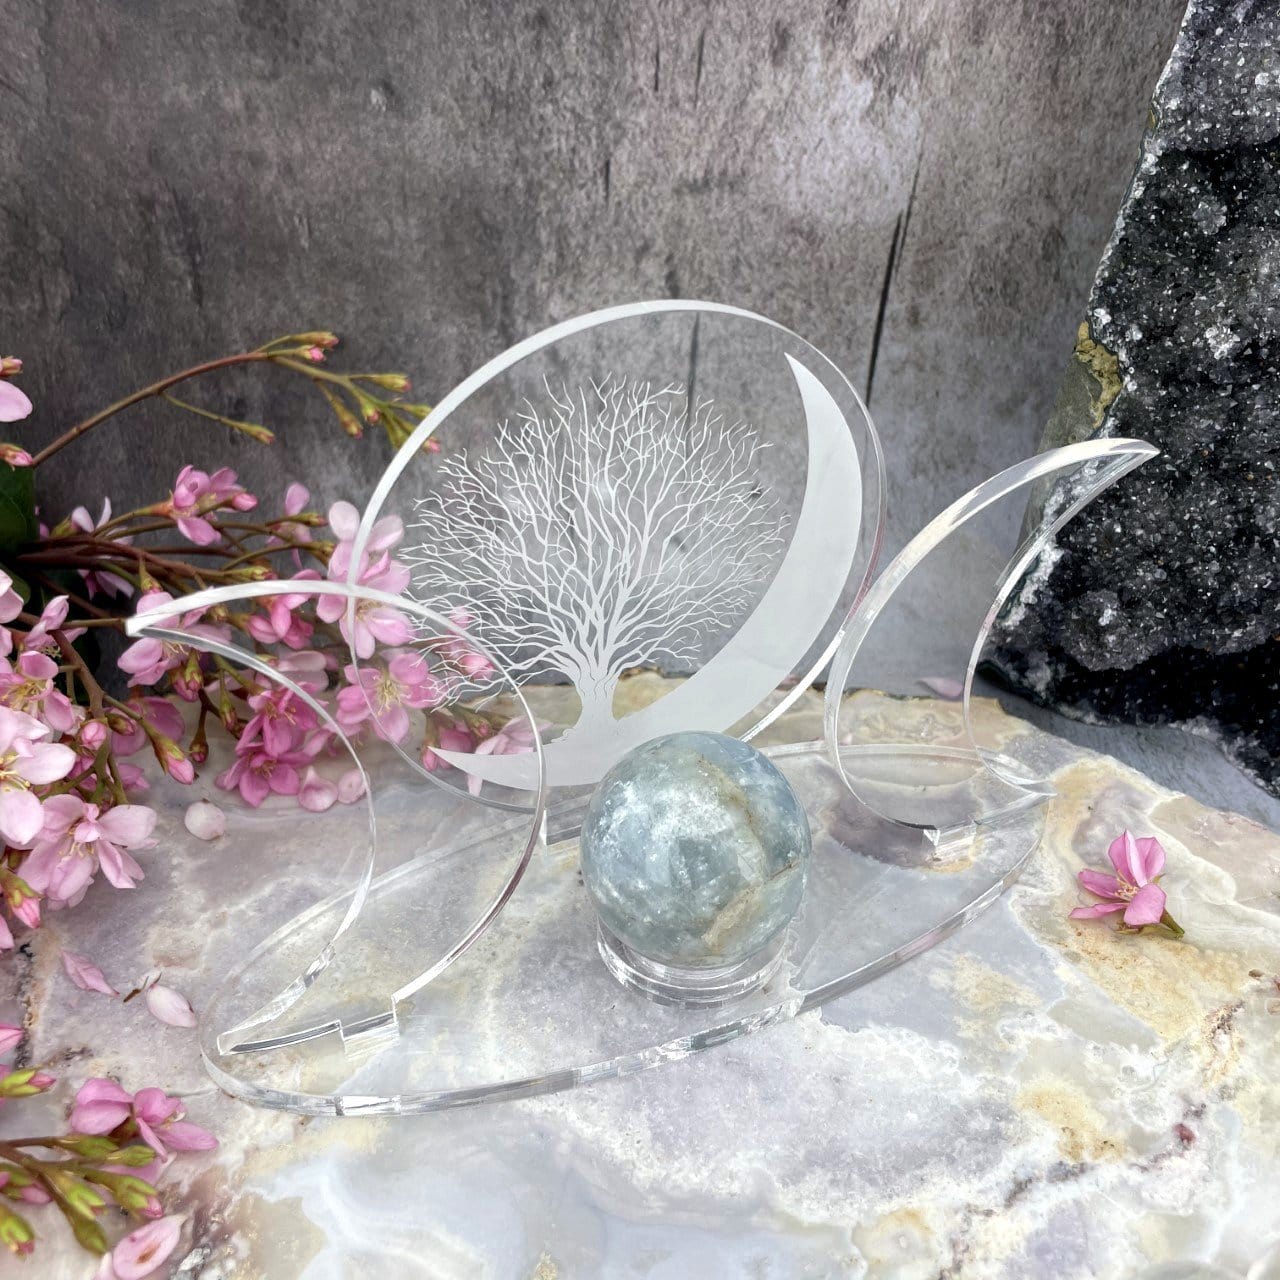 An Acrylic Sphere Holder Crescent Moons - Tree of Life holding a sphere in an alter that consists of flowers and crystals.